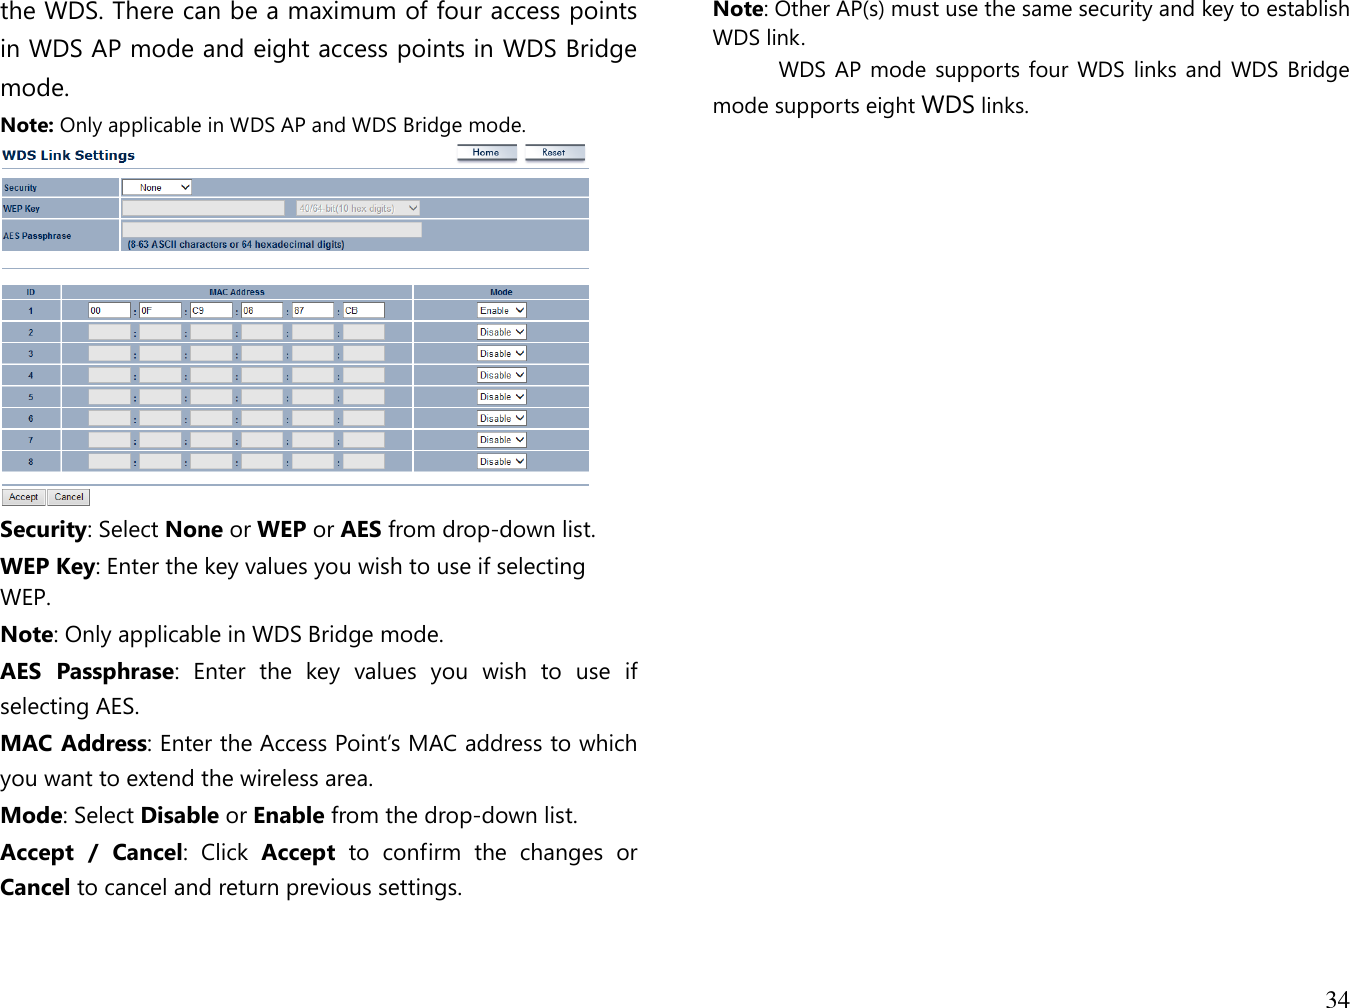 34  the WDS. There can be a maximum of four access points in WDS AP mode and eight access points in WDS Bridge mode. Note: Only applicable in WDS AP and WDS Bridge mode.  Security: Select None or WEP or AES from drop-down list. WEP Key: Enter the key values you wish to use if selecting WEP.  Note: Only applicable in WDS Bridge mode. AES  Passphrase:  Enter  the  key  values  you  wish  to  use  if selecting AES. MAC Address: Enter the Access Point’s MAC address to which you want to extend the wireless area. Mode: Select Disable or Enable from the drop-down list. Accept  /  Cancel:  Click  Accept  to  confirm  the  changes  or Cancel to cancel and return previous settings.  Note: Other AP(s) must use the same security and key to establish WDS link.            WDS AP mode  supports four WDS links and WDS Bridge mode supports eight WDS links.   